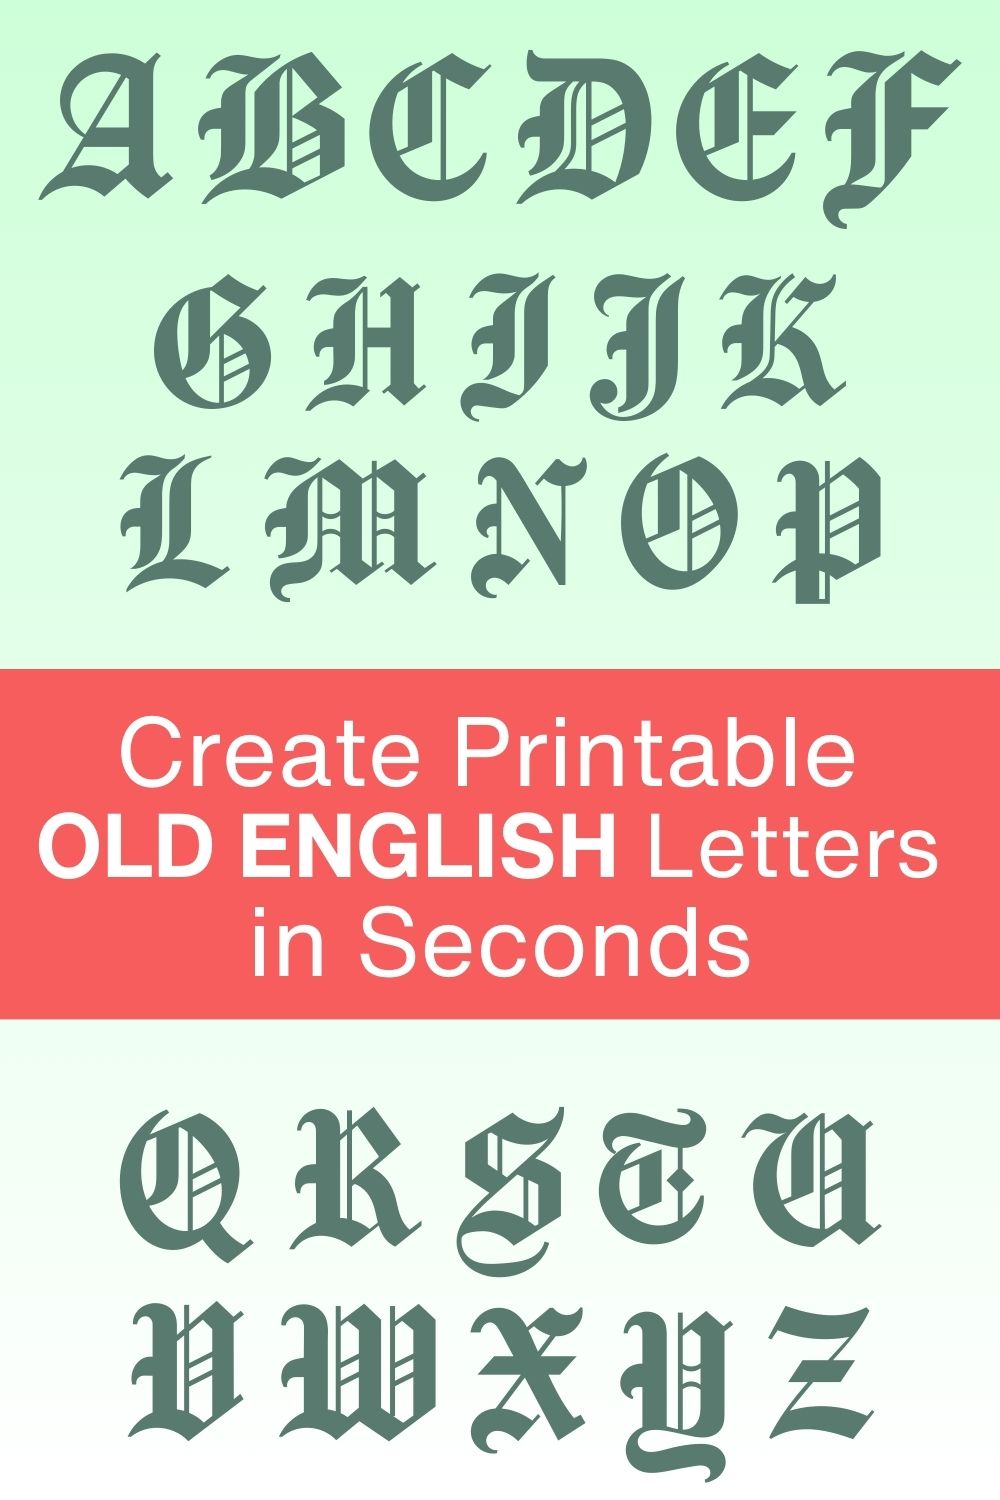 FREE printable letter old english, DIY, font, templates, bold number and alphabet downloadable patterns, typeface